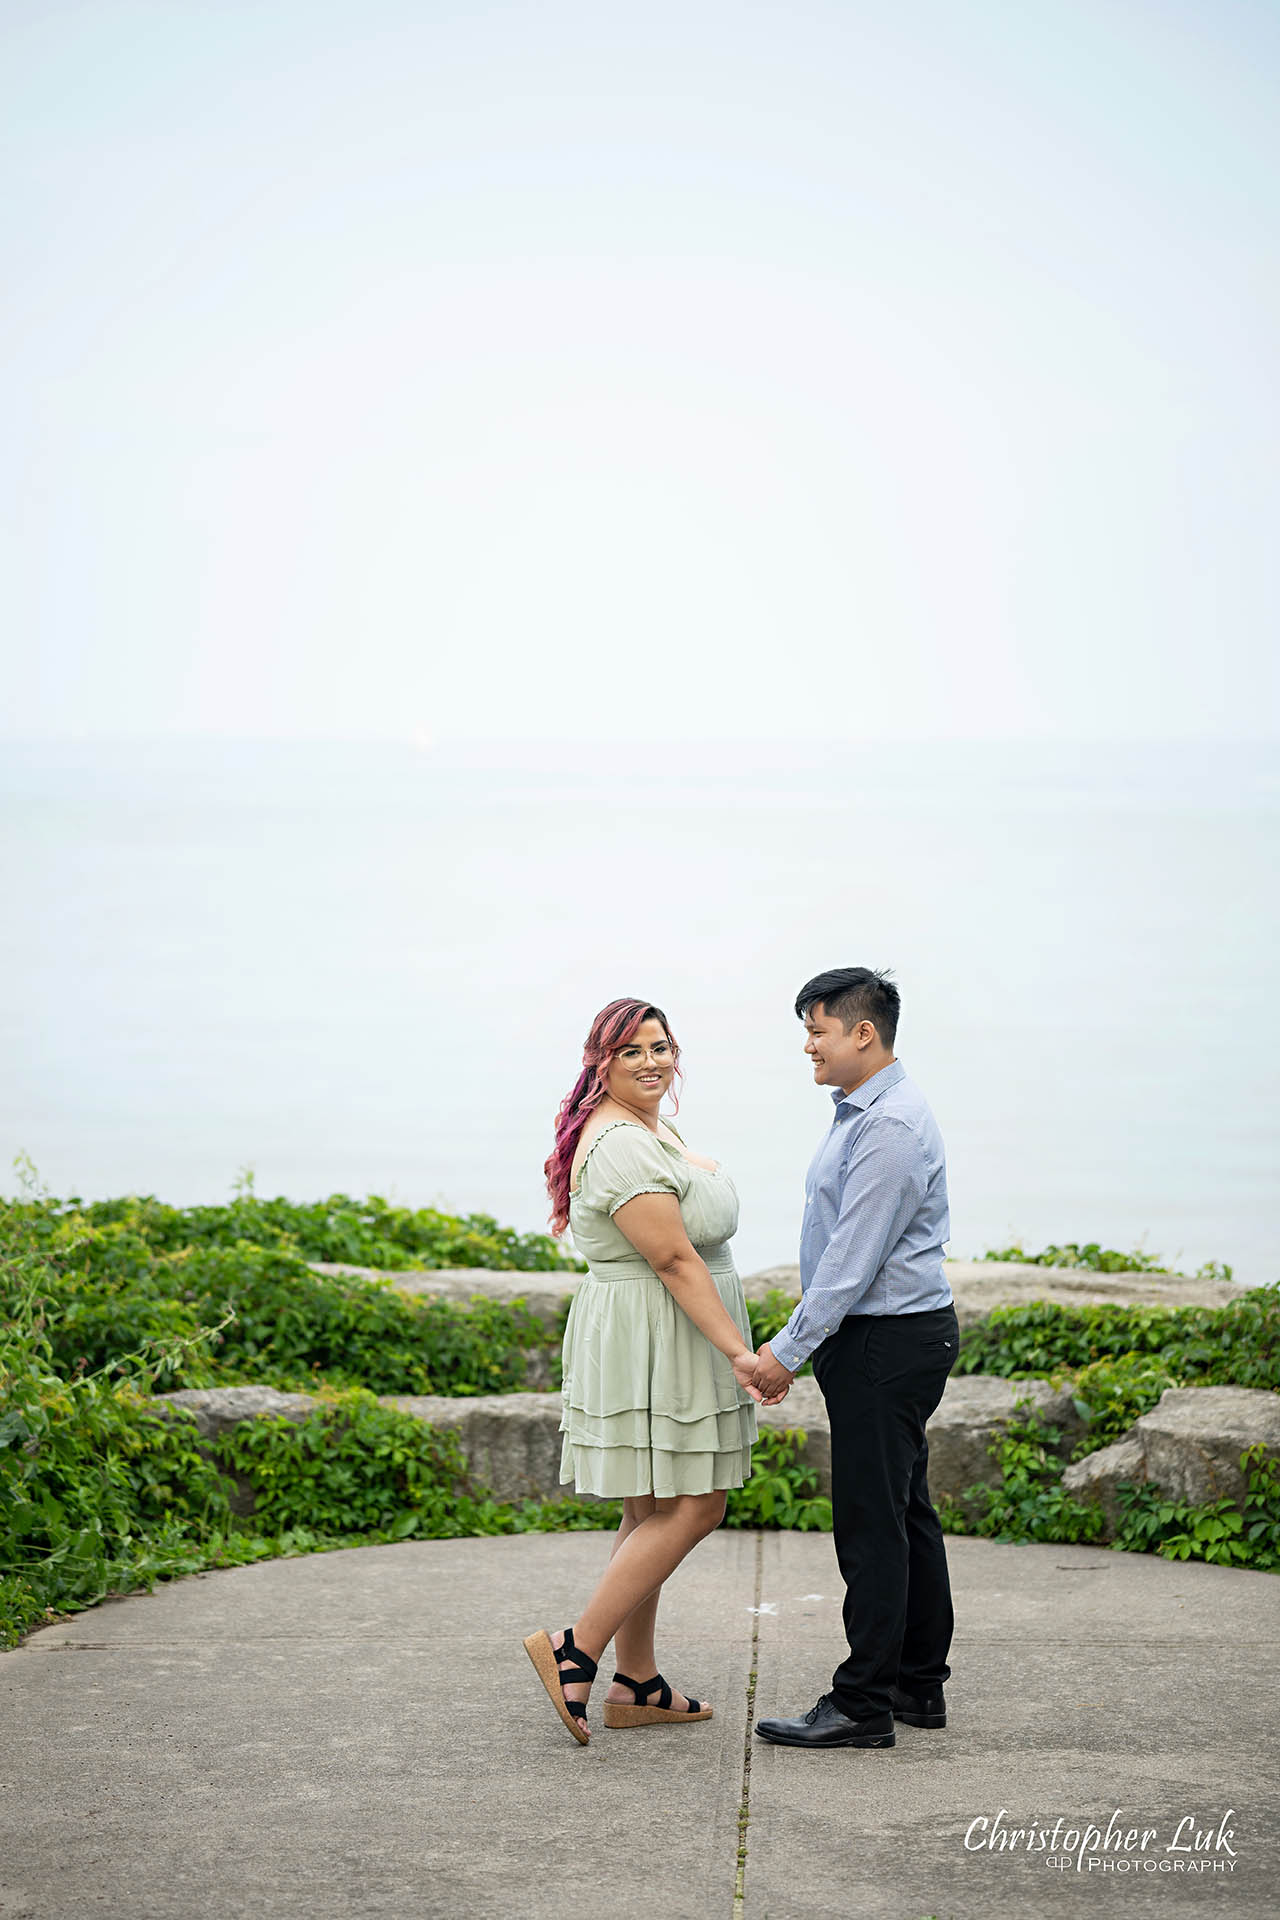 Adamson Estate Waterfront Bride Groom Holding Hands Together Smile Cute Adorable Intimate Natural Candid Organic Photojournalistic Portrait